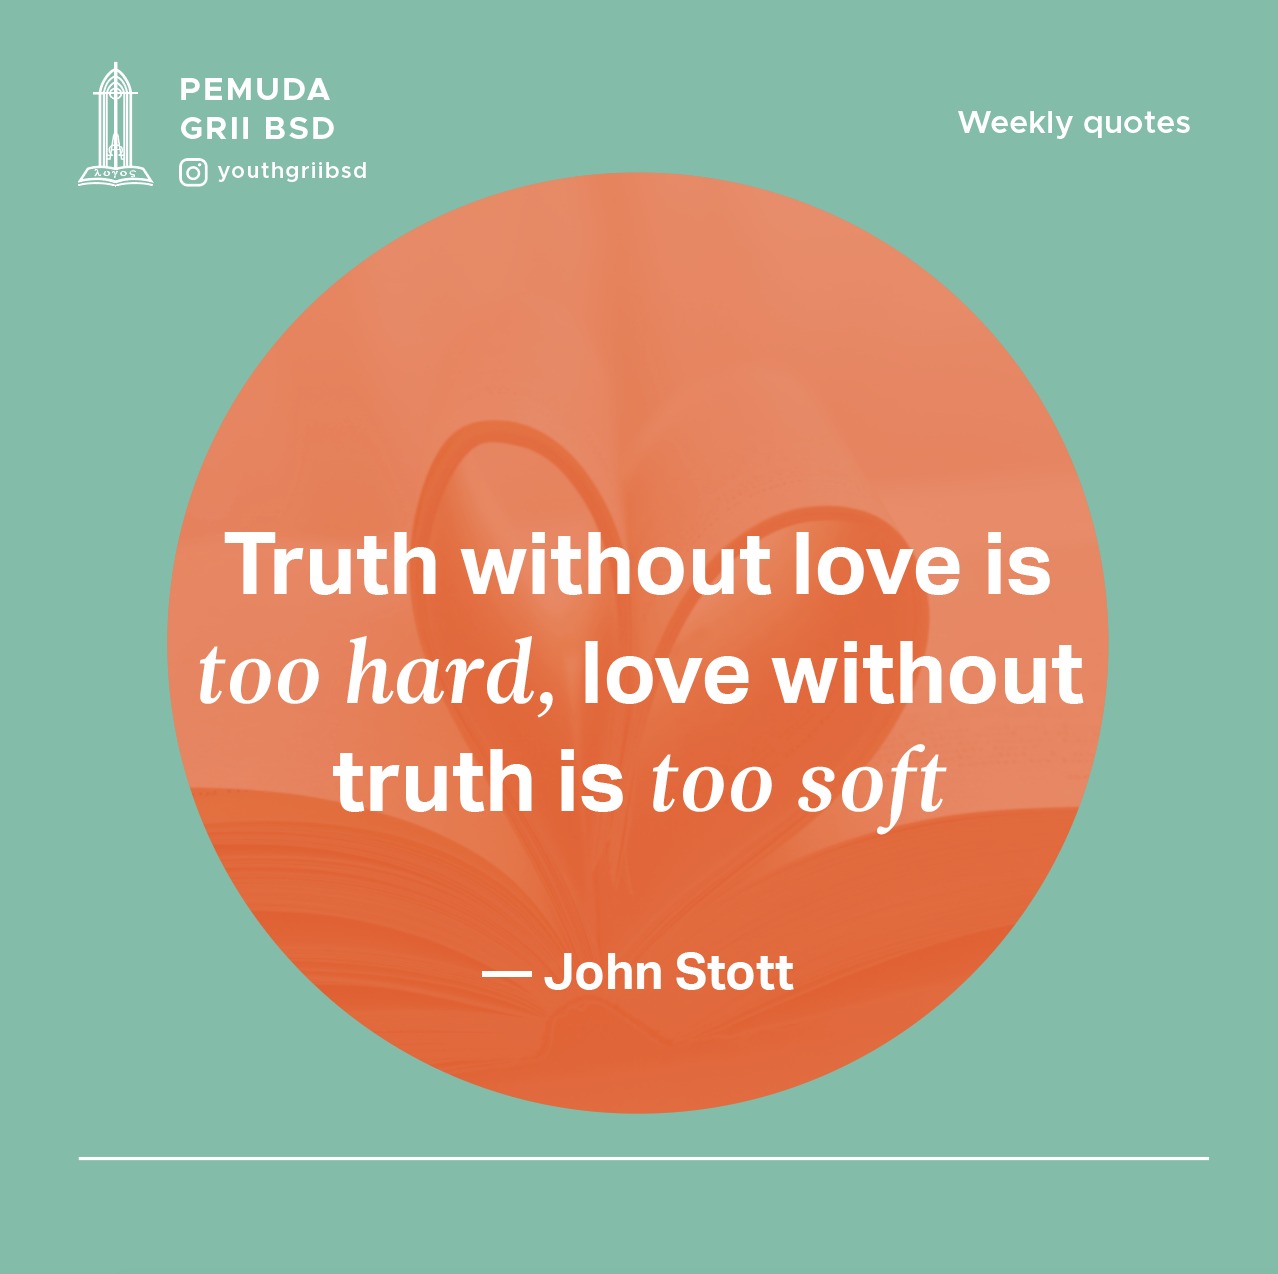 Truth without love is too hard, love without truth is too soft.